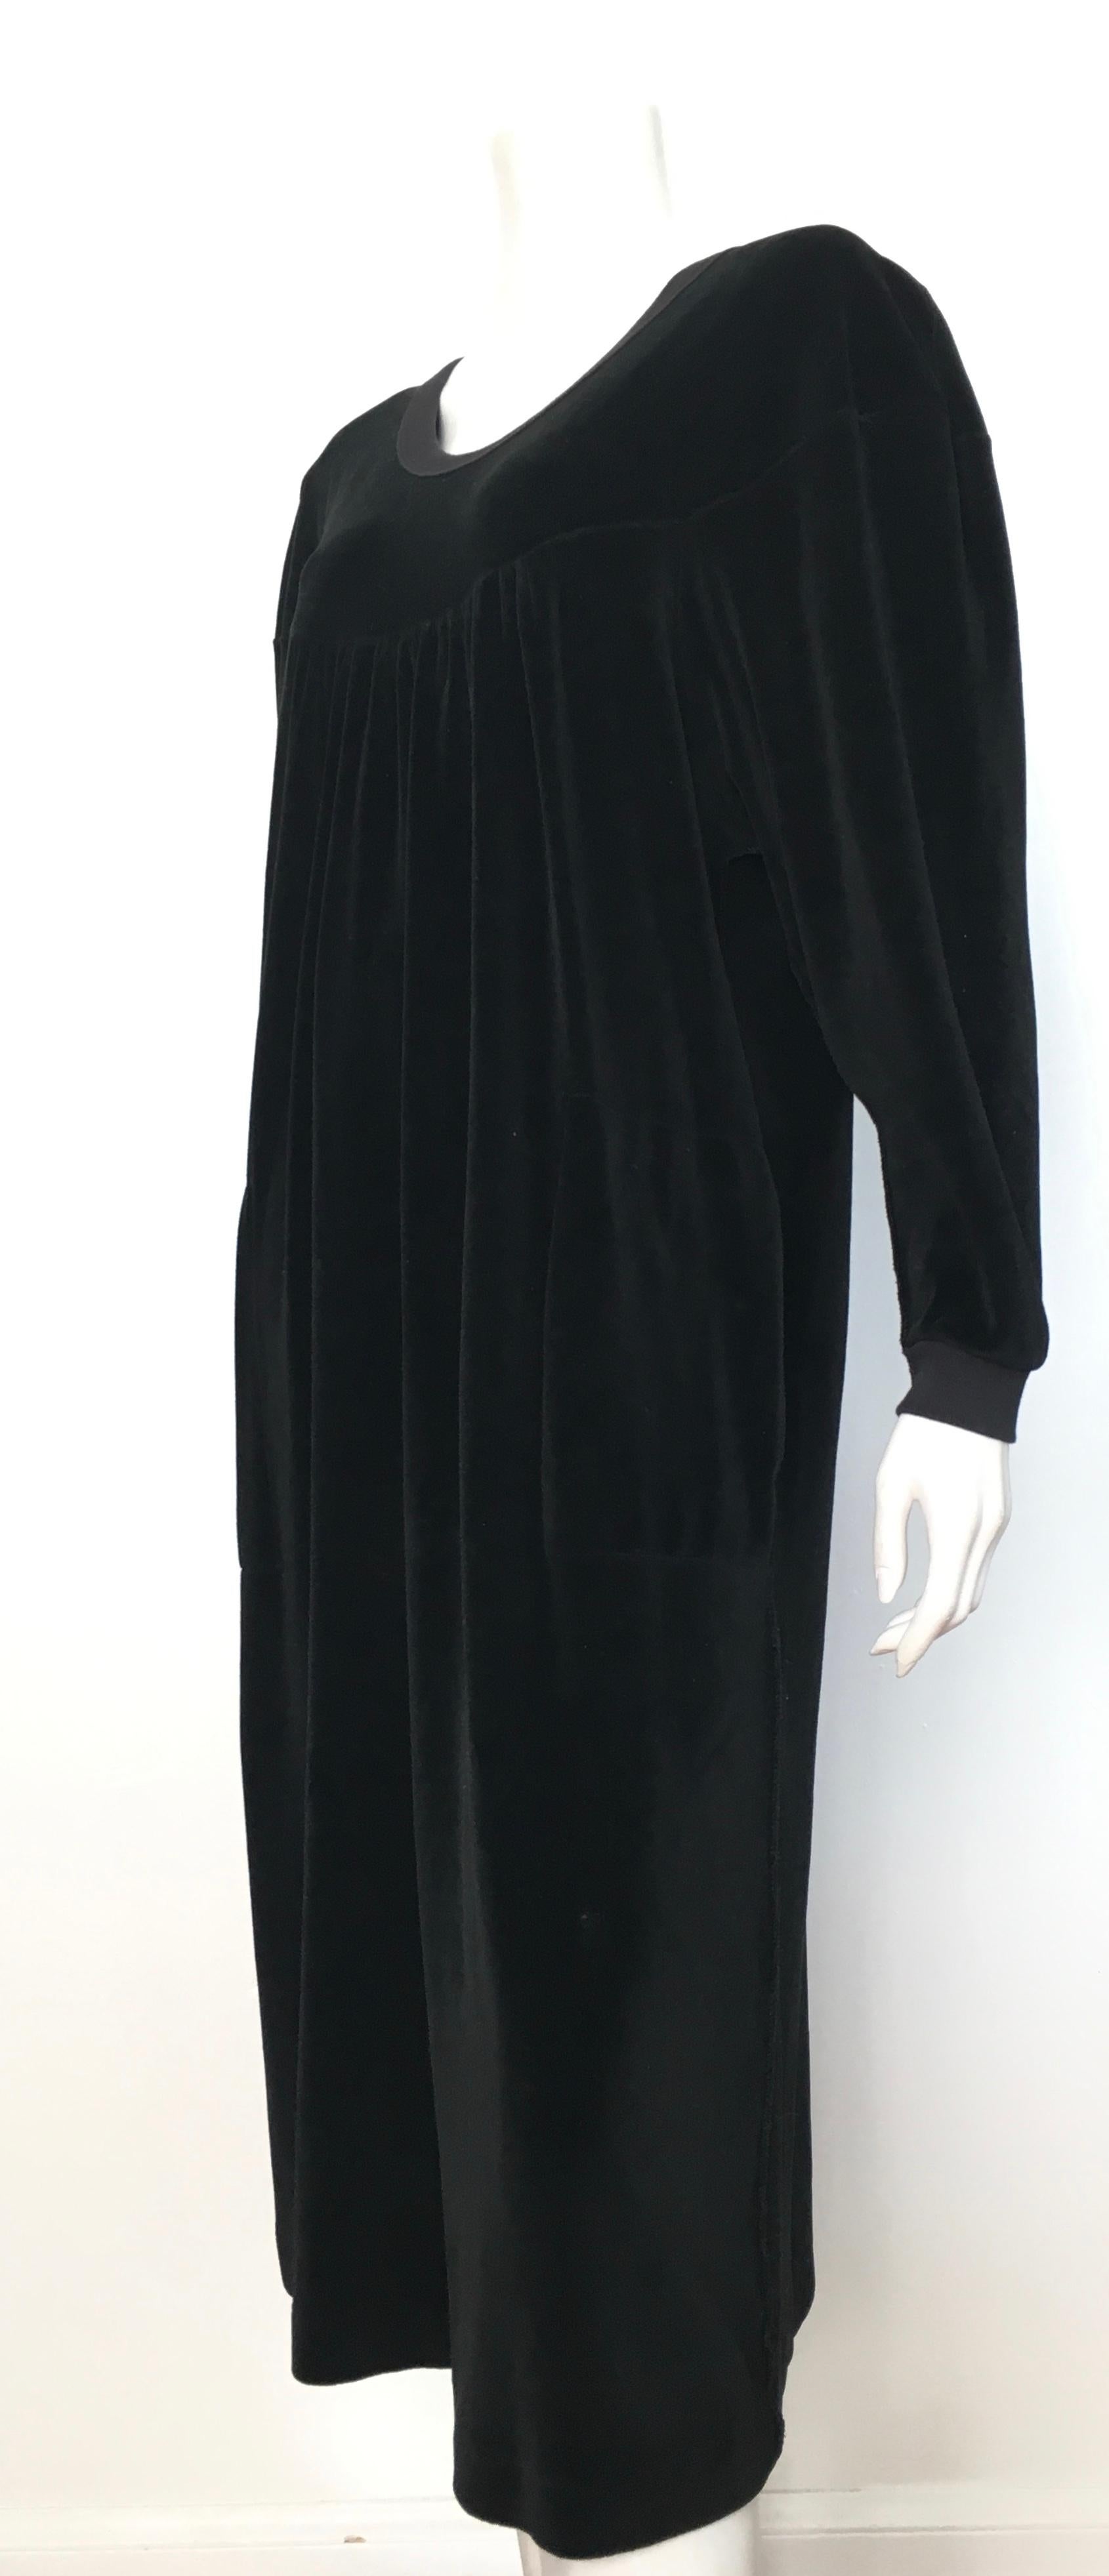 Sonia Rykiel 1980s Black Velour Dress with Pockets & Cardigan Size Large. For Sale 7